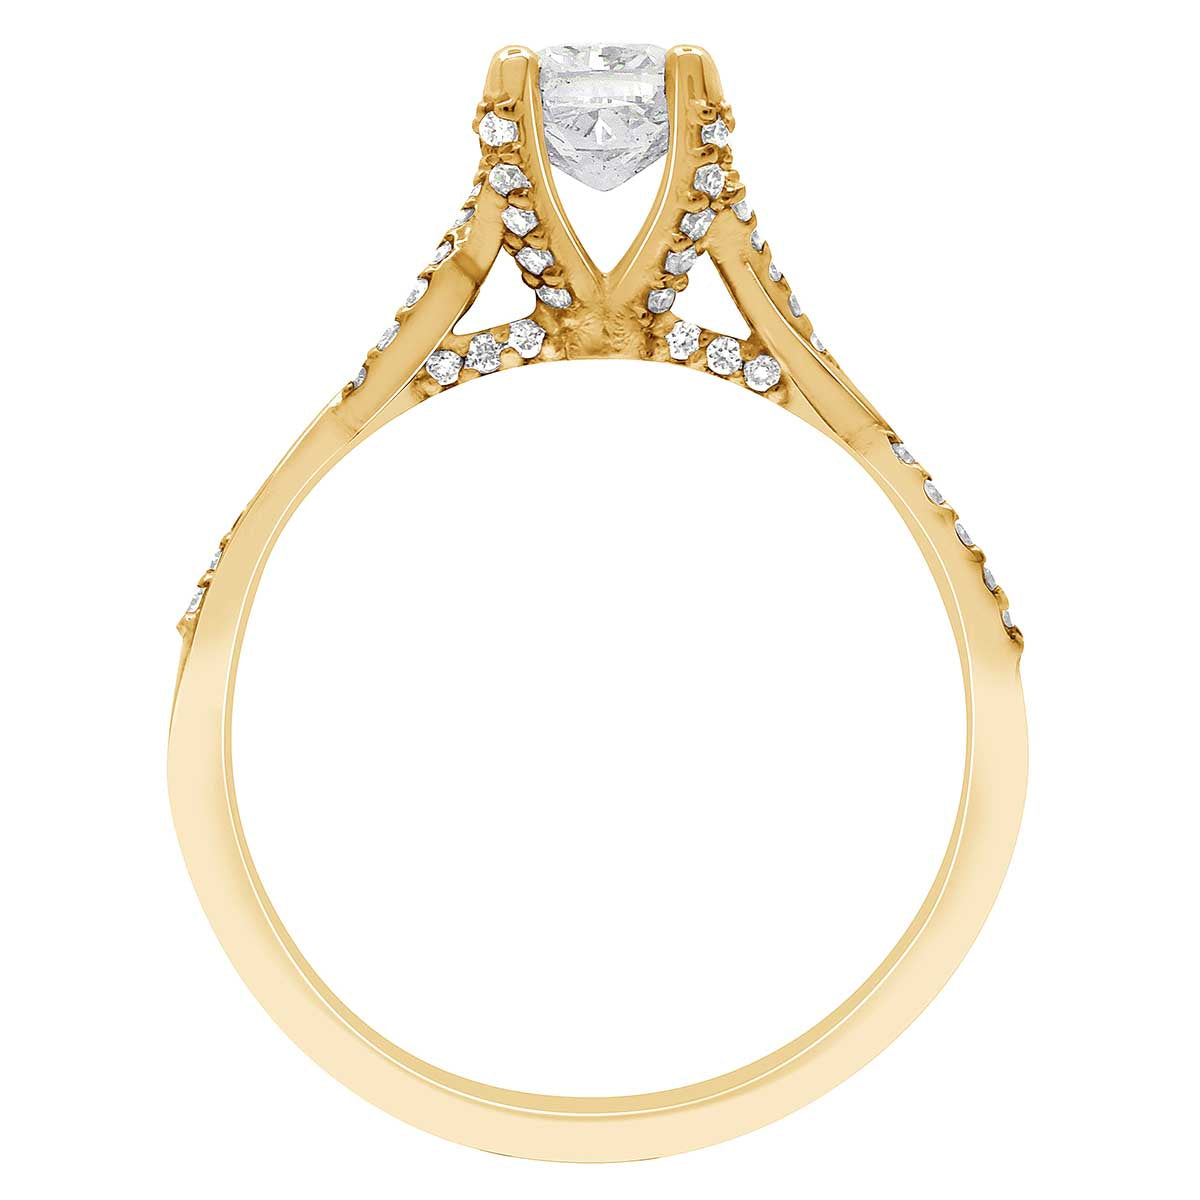 Engagement Ring With Twisted band made in yellow gold standing in an upright position